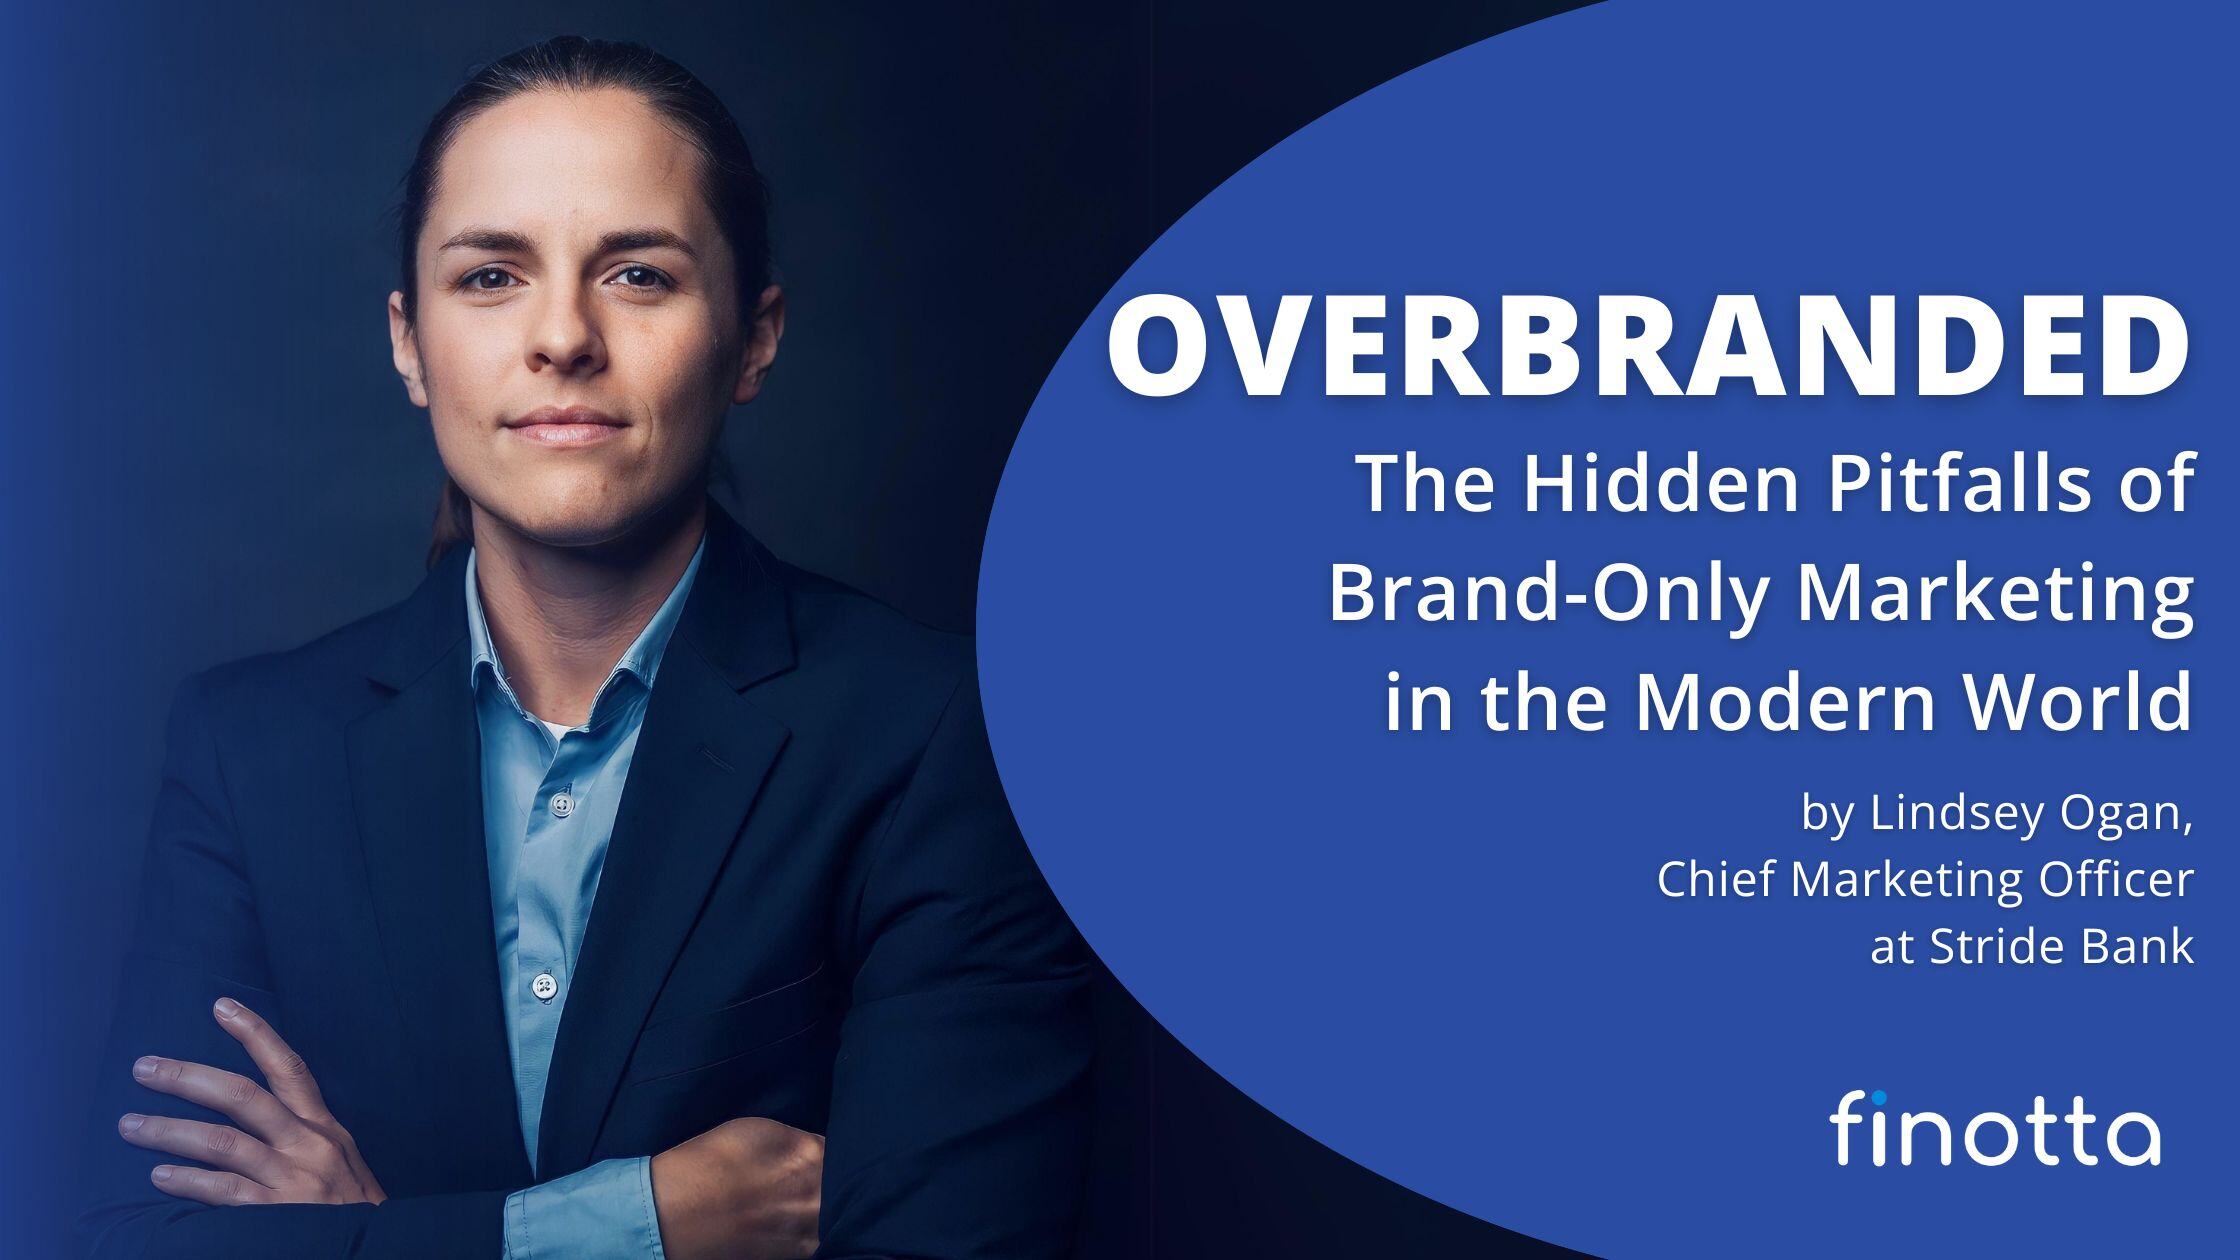 Overbranded: The Hidden Pitfalls of Brand-Only Marketing in the Modern World